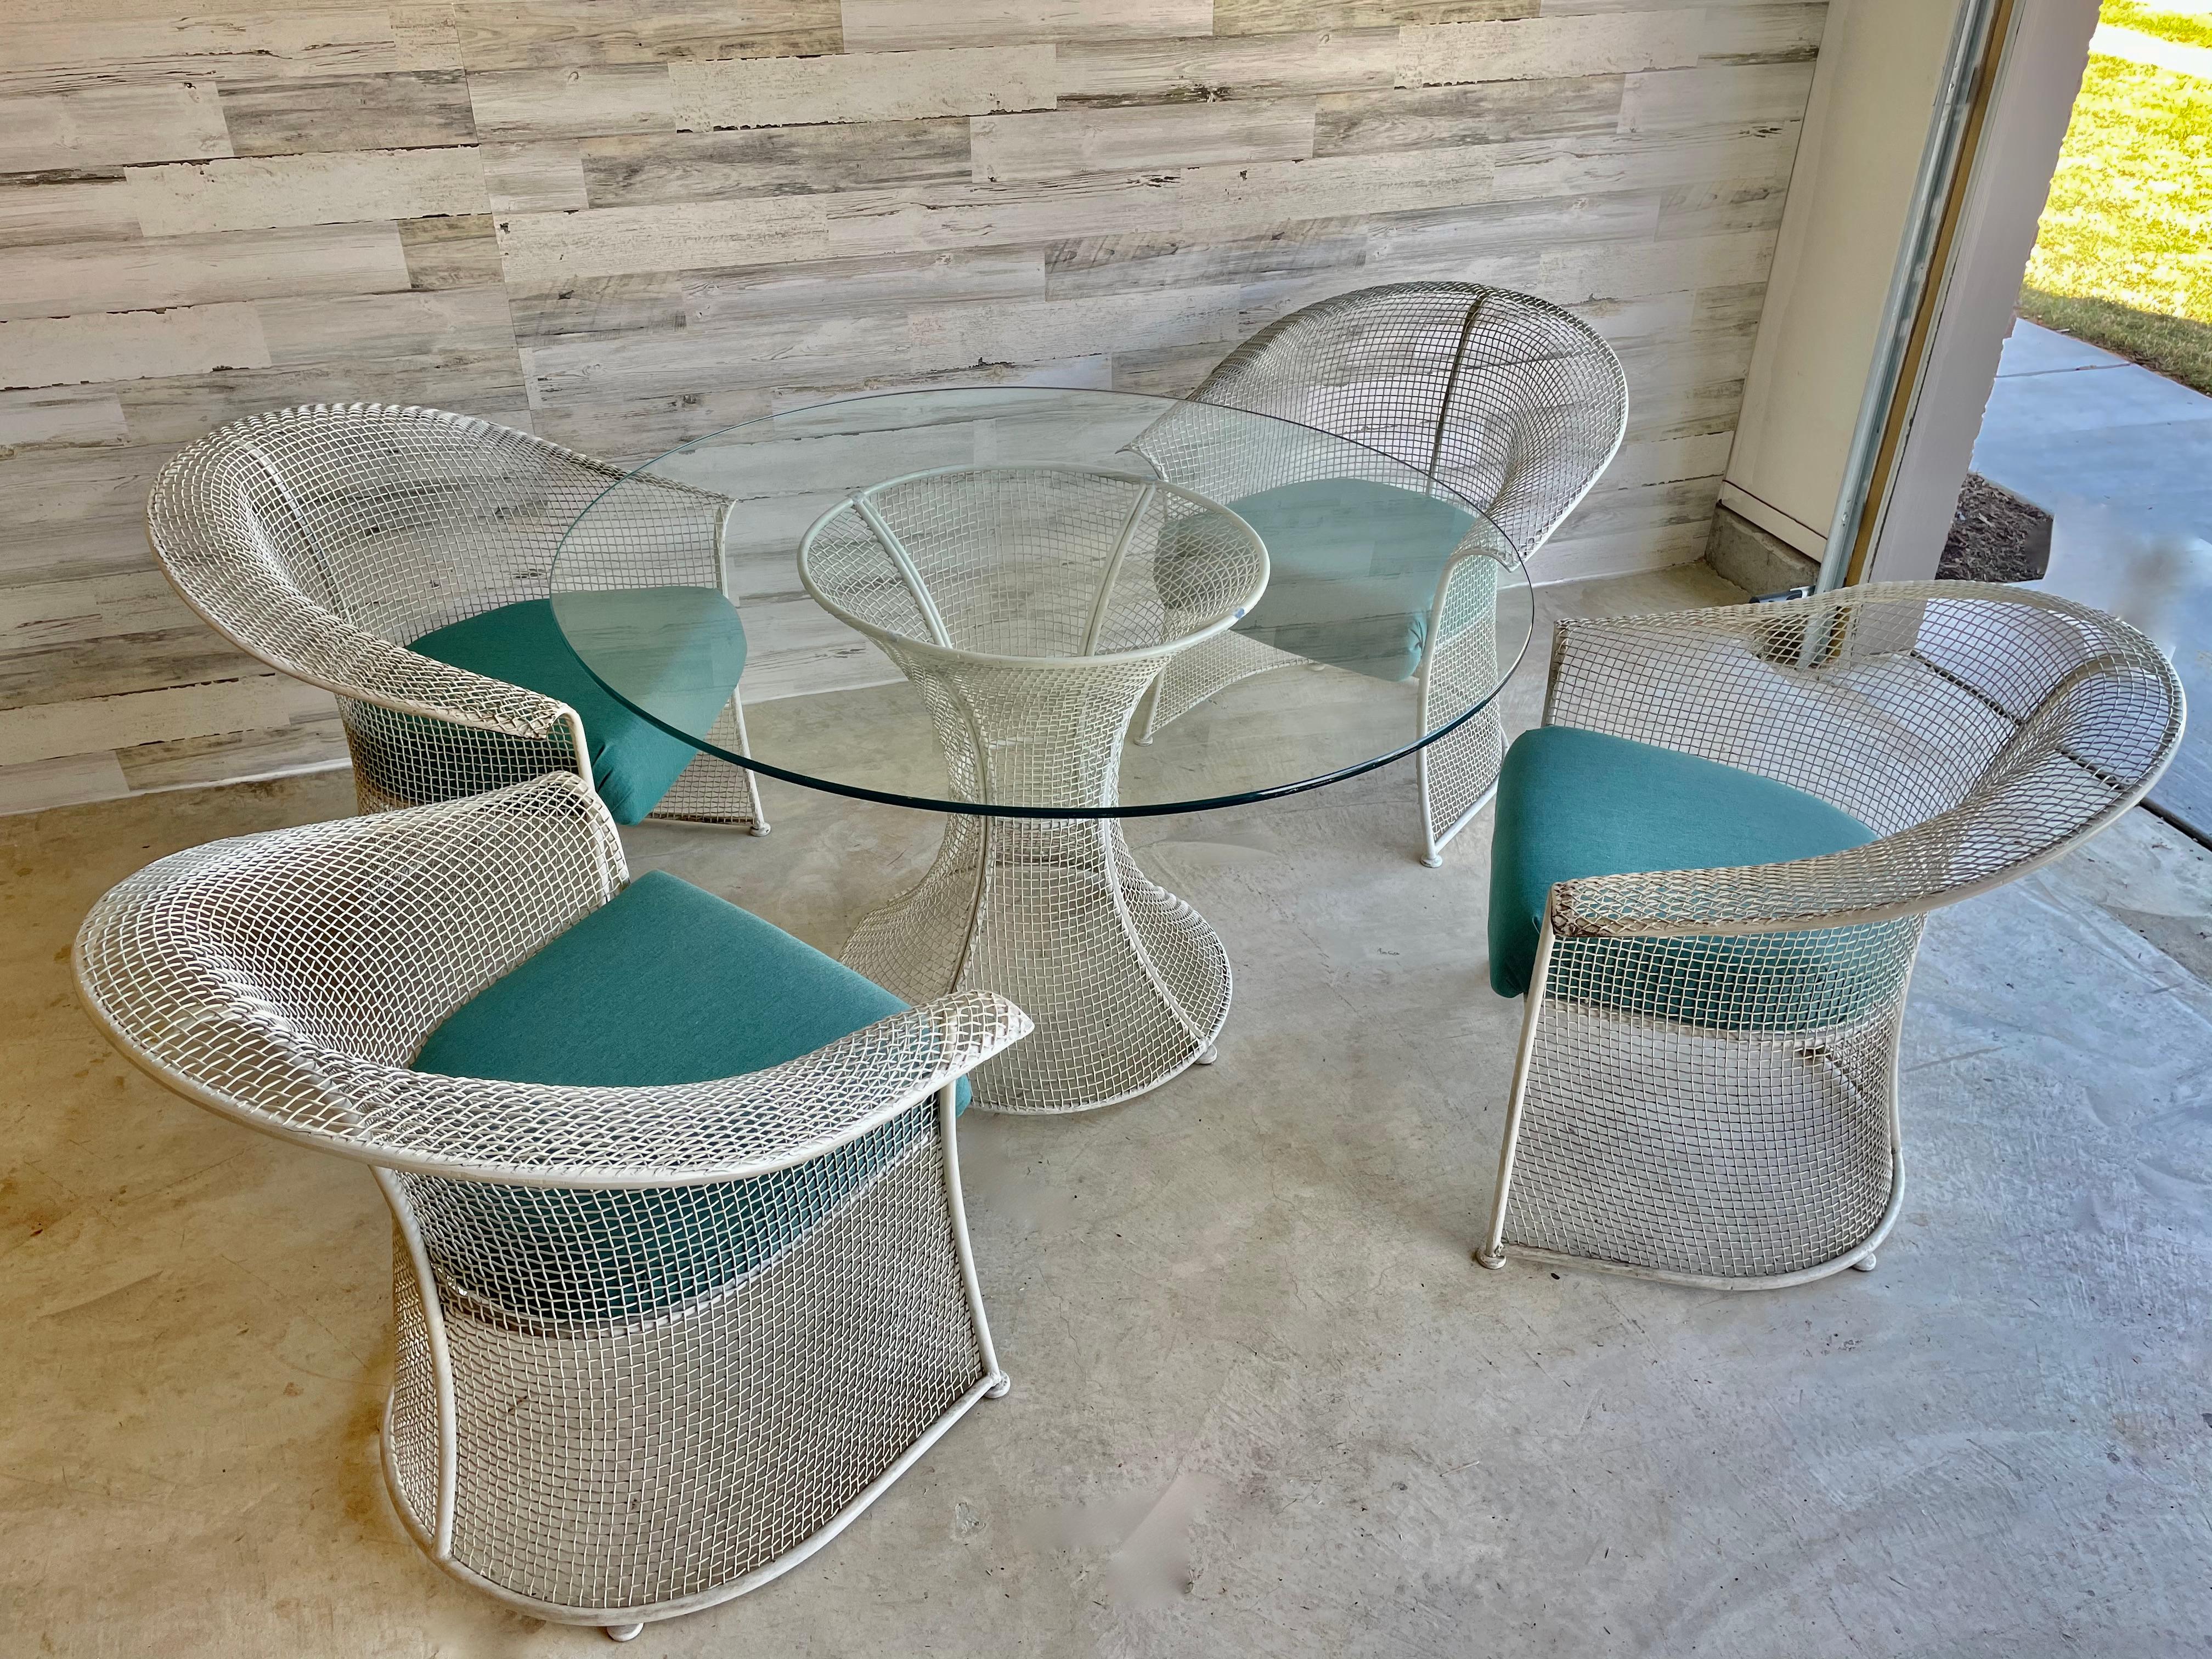 Russell woodard wire formed patio dining set. Newly reupholstered in a teal sunbrella fabric. This set has a nice patina on it. Ready for use or can be powder coated if desired. 

Table dimensions: 48 L x 48 W x 28.5 H
Each chair: 29 L x 26 D x